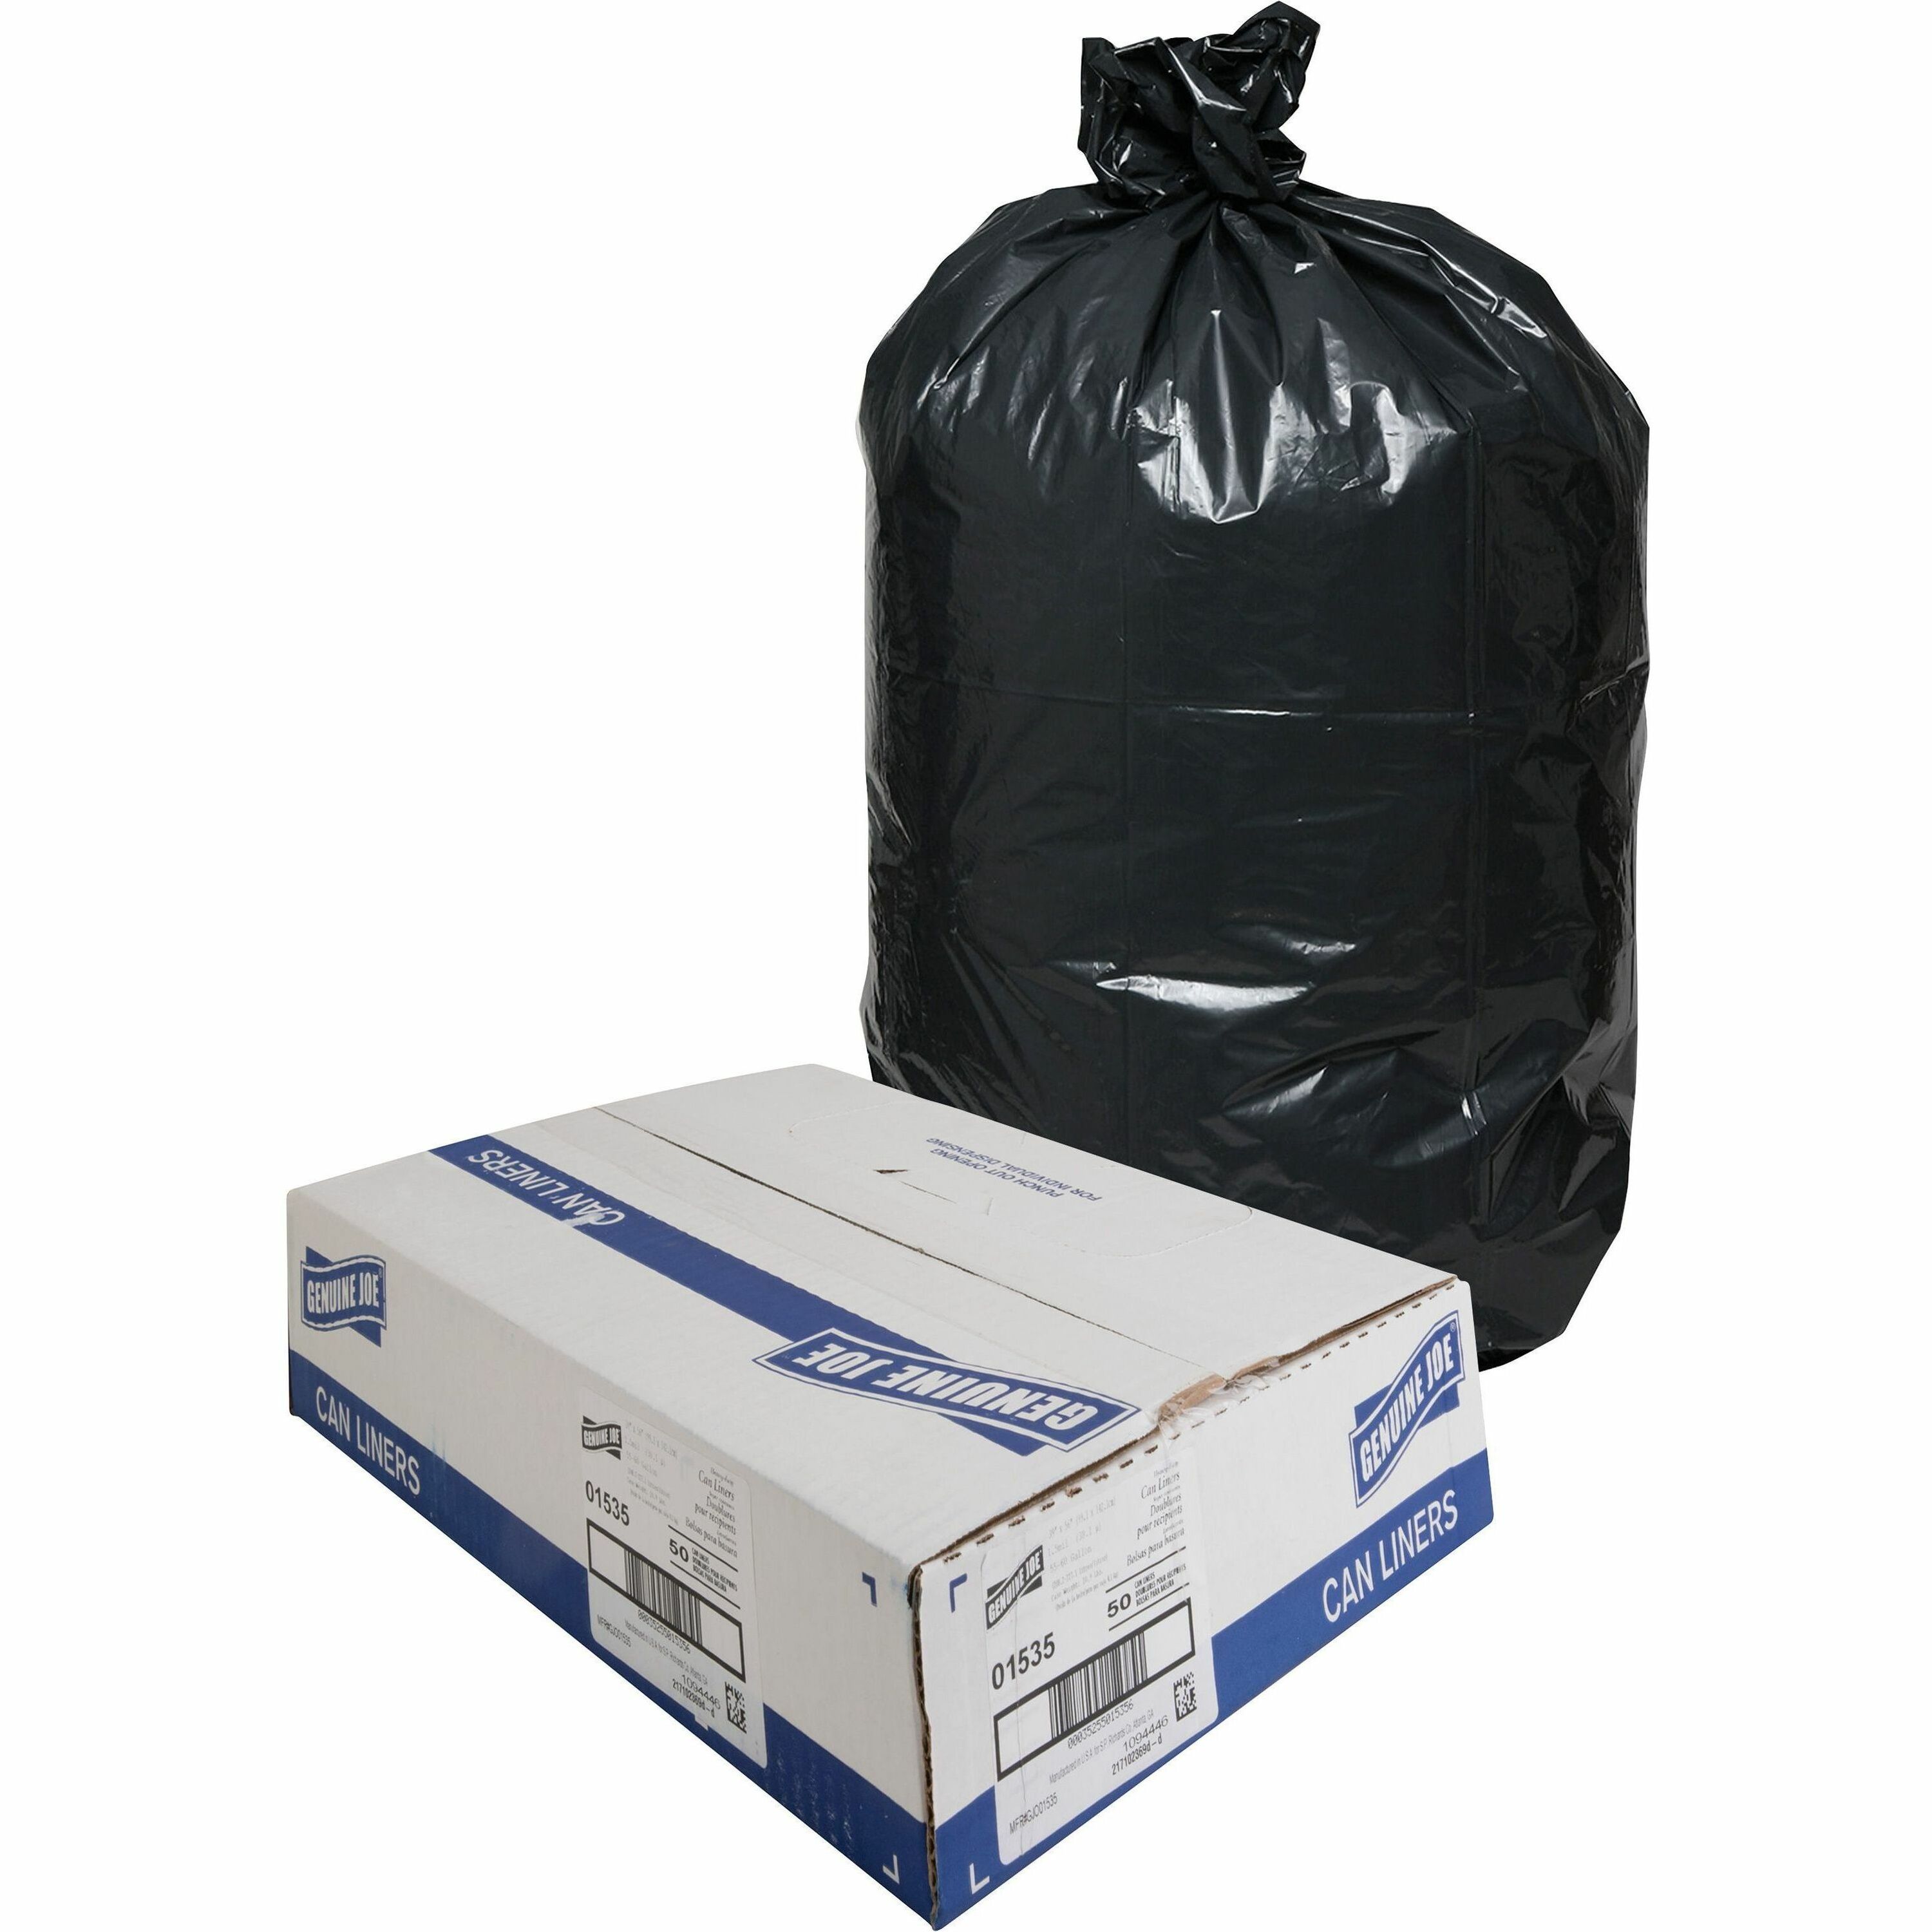 Stock Your Home 2 Gallon Clear Trash Bags (500 Pack) - Disposable Plas